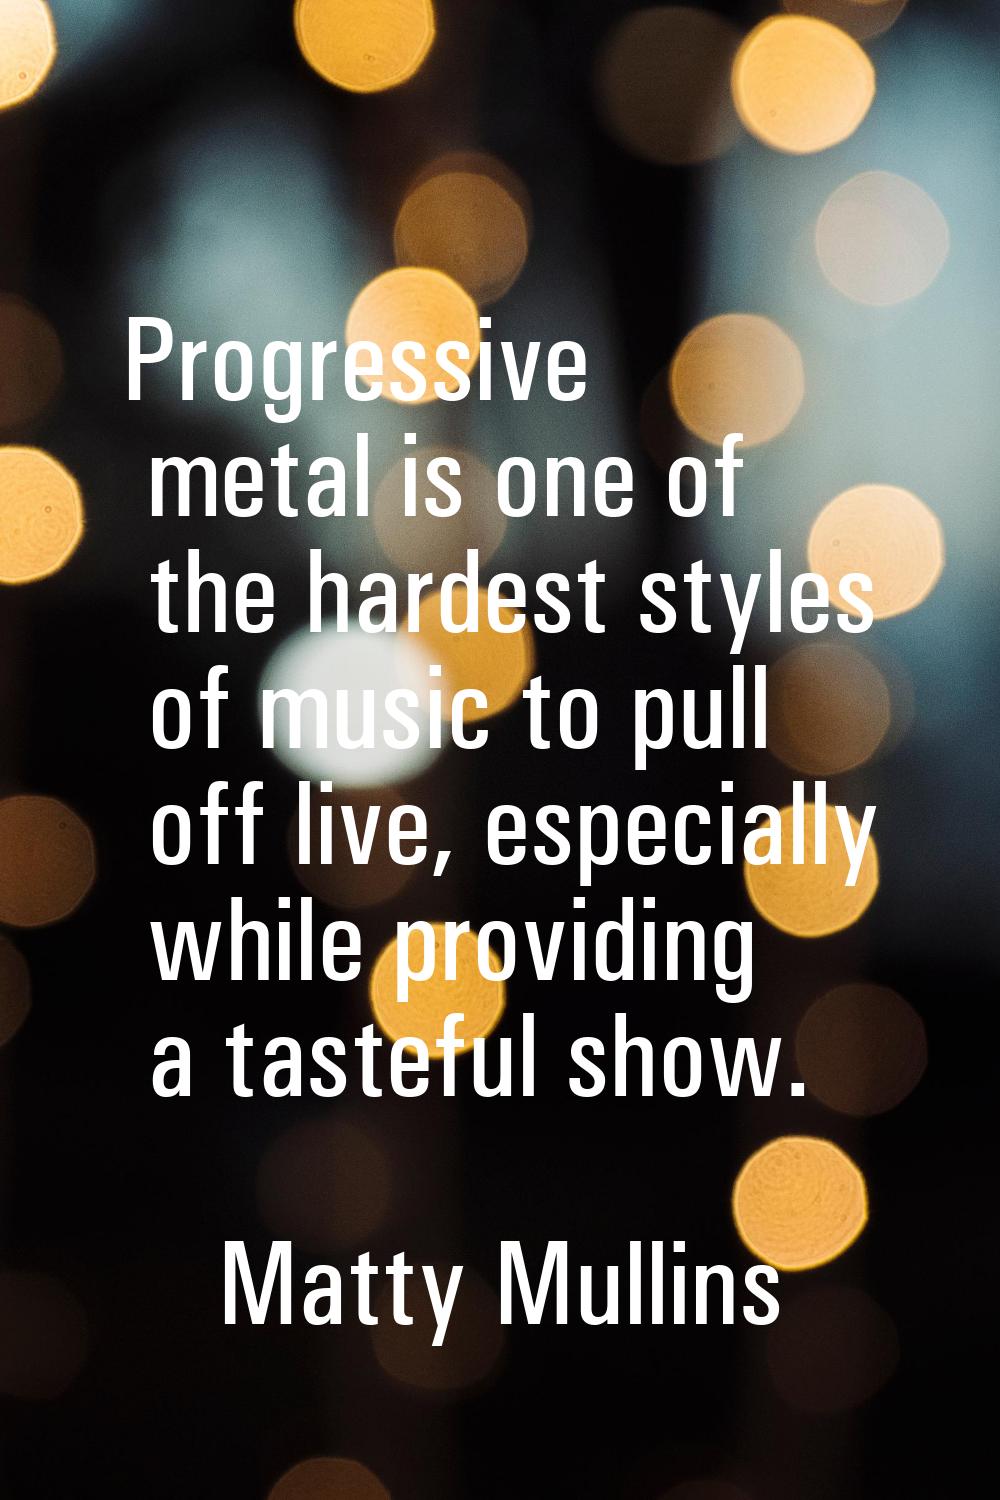 Progressive metal is one of the hardest styles of music to pull off live, especially while providin